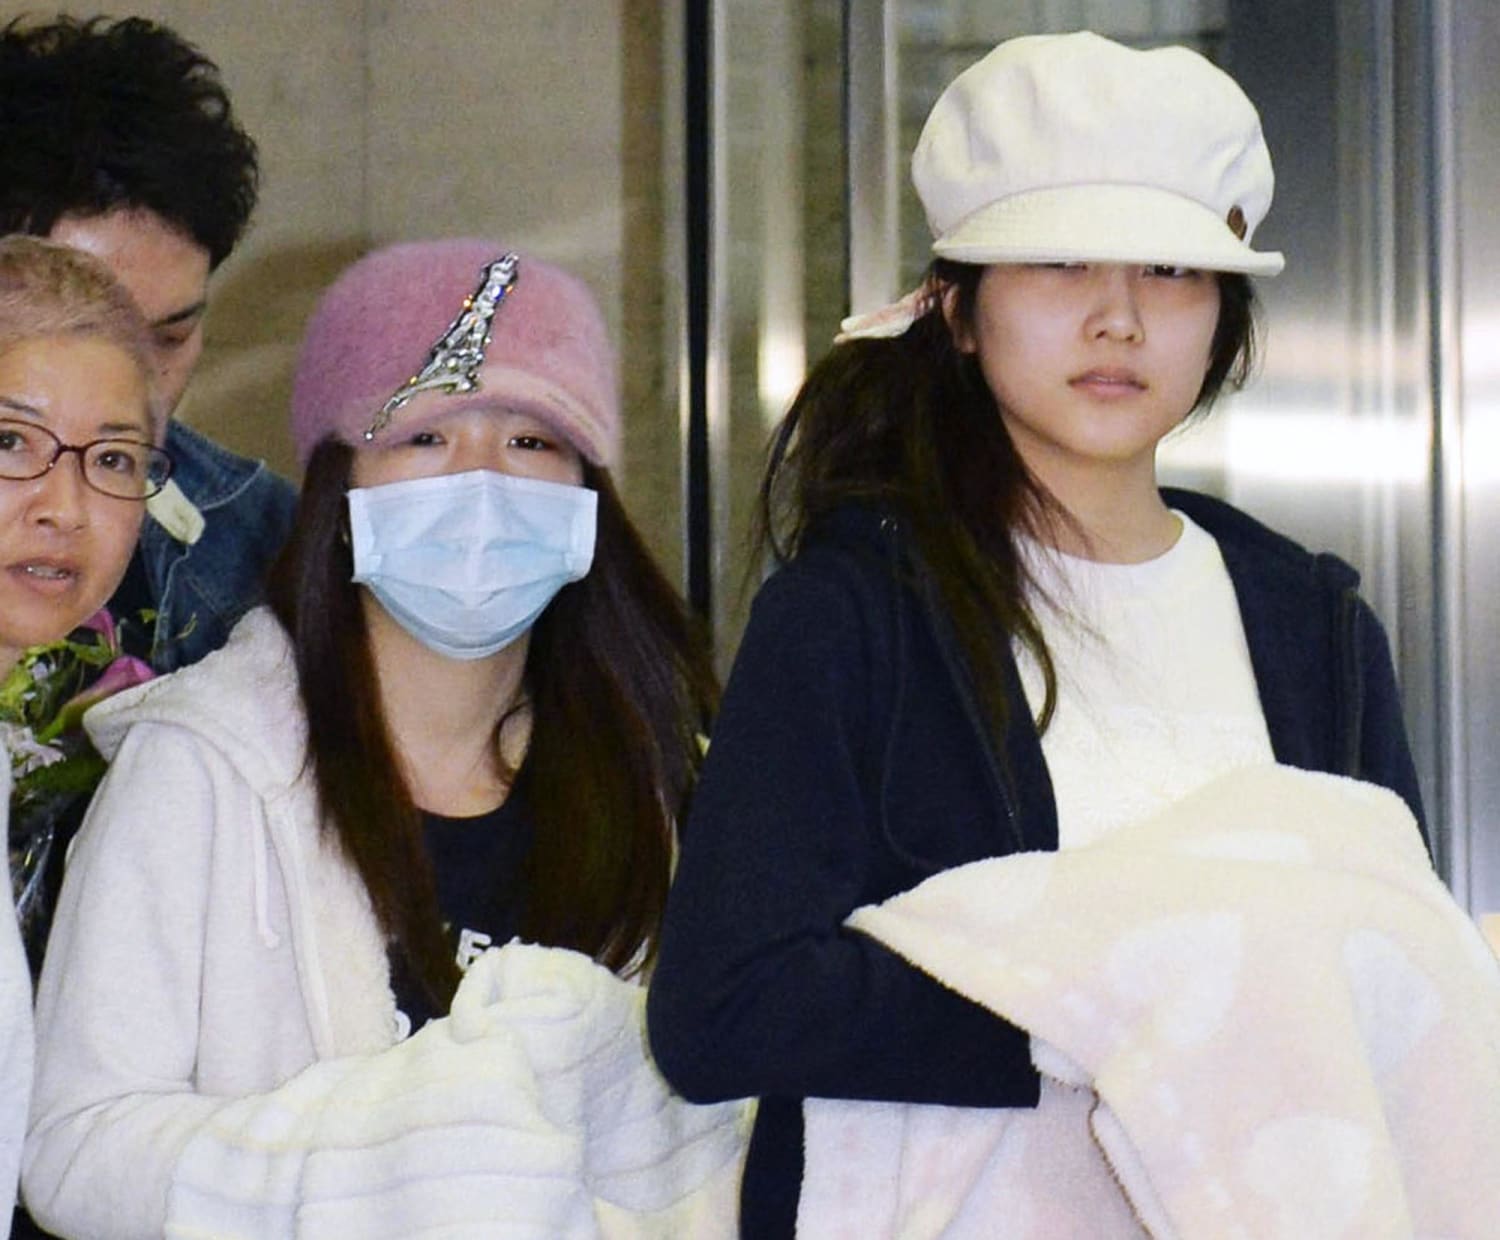 Slasher Attacks 2 Members Of Japan S Akb48 Girl Band At Fan Event